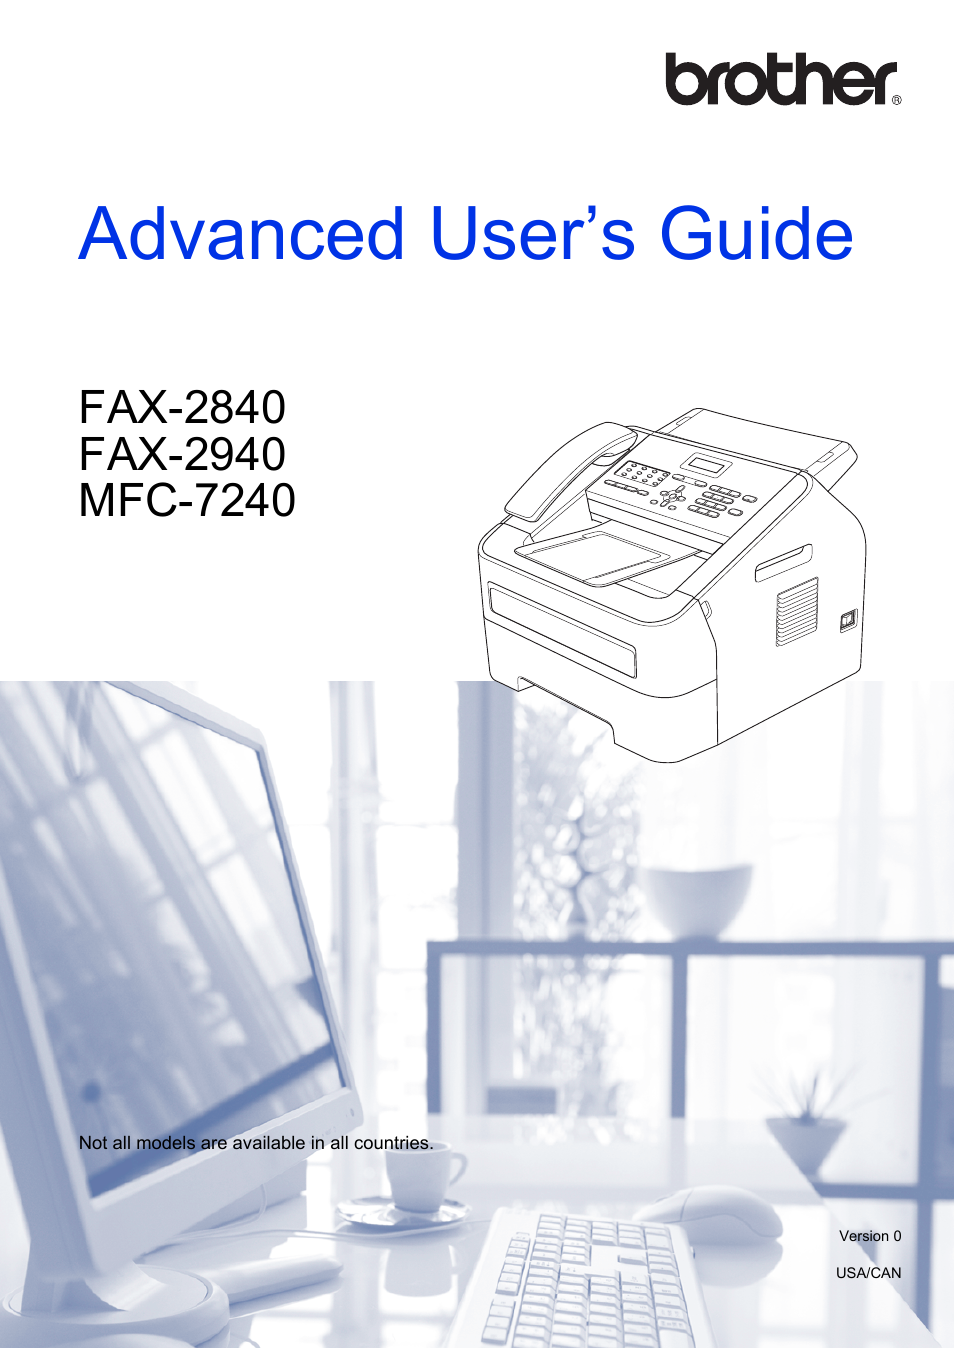 Brother FAX-2840 User Manual | 72 pages | Also for: FAX-2940, MFC-7240